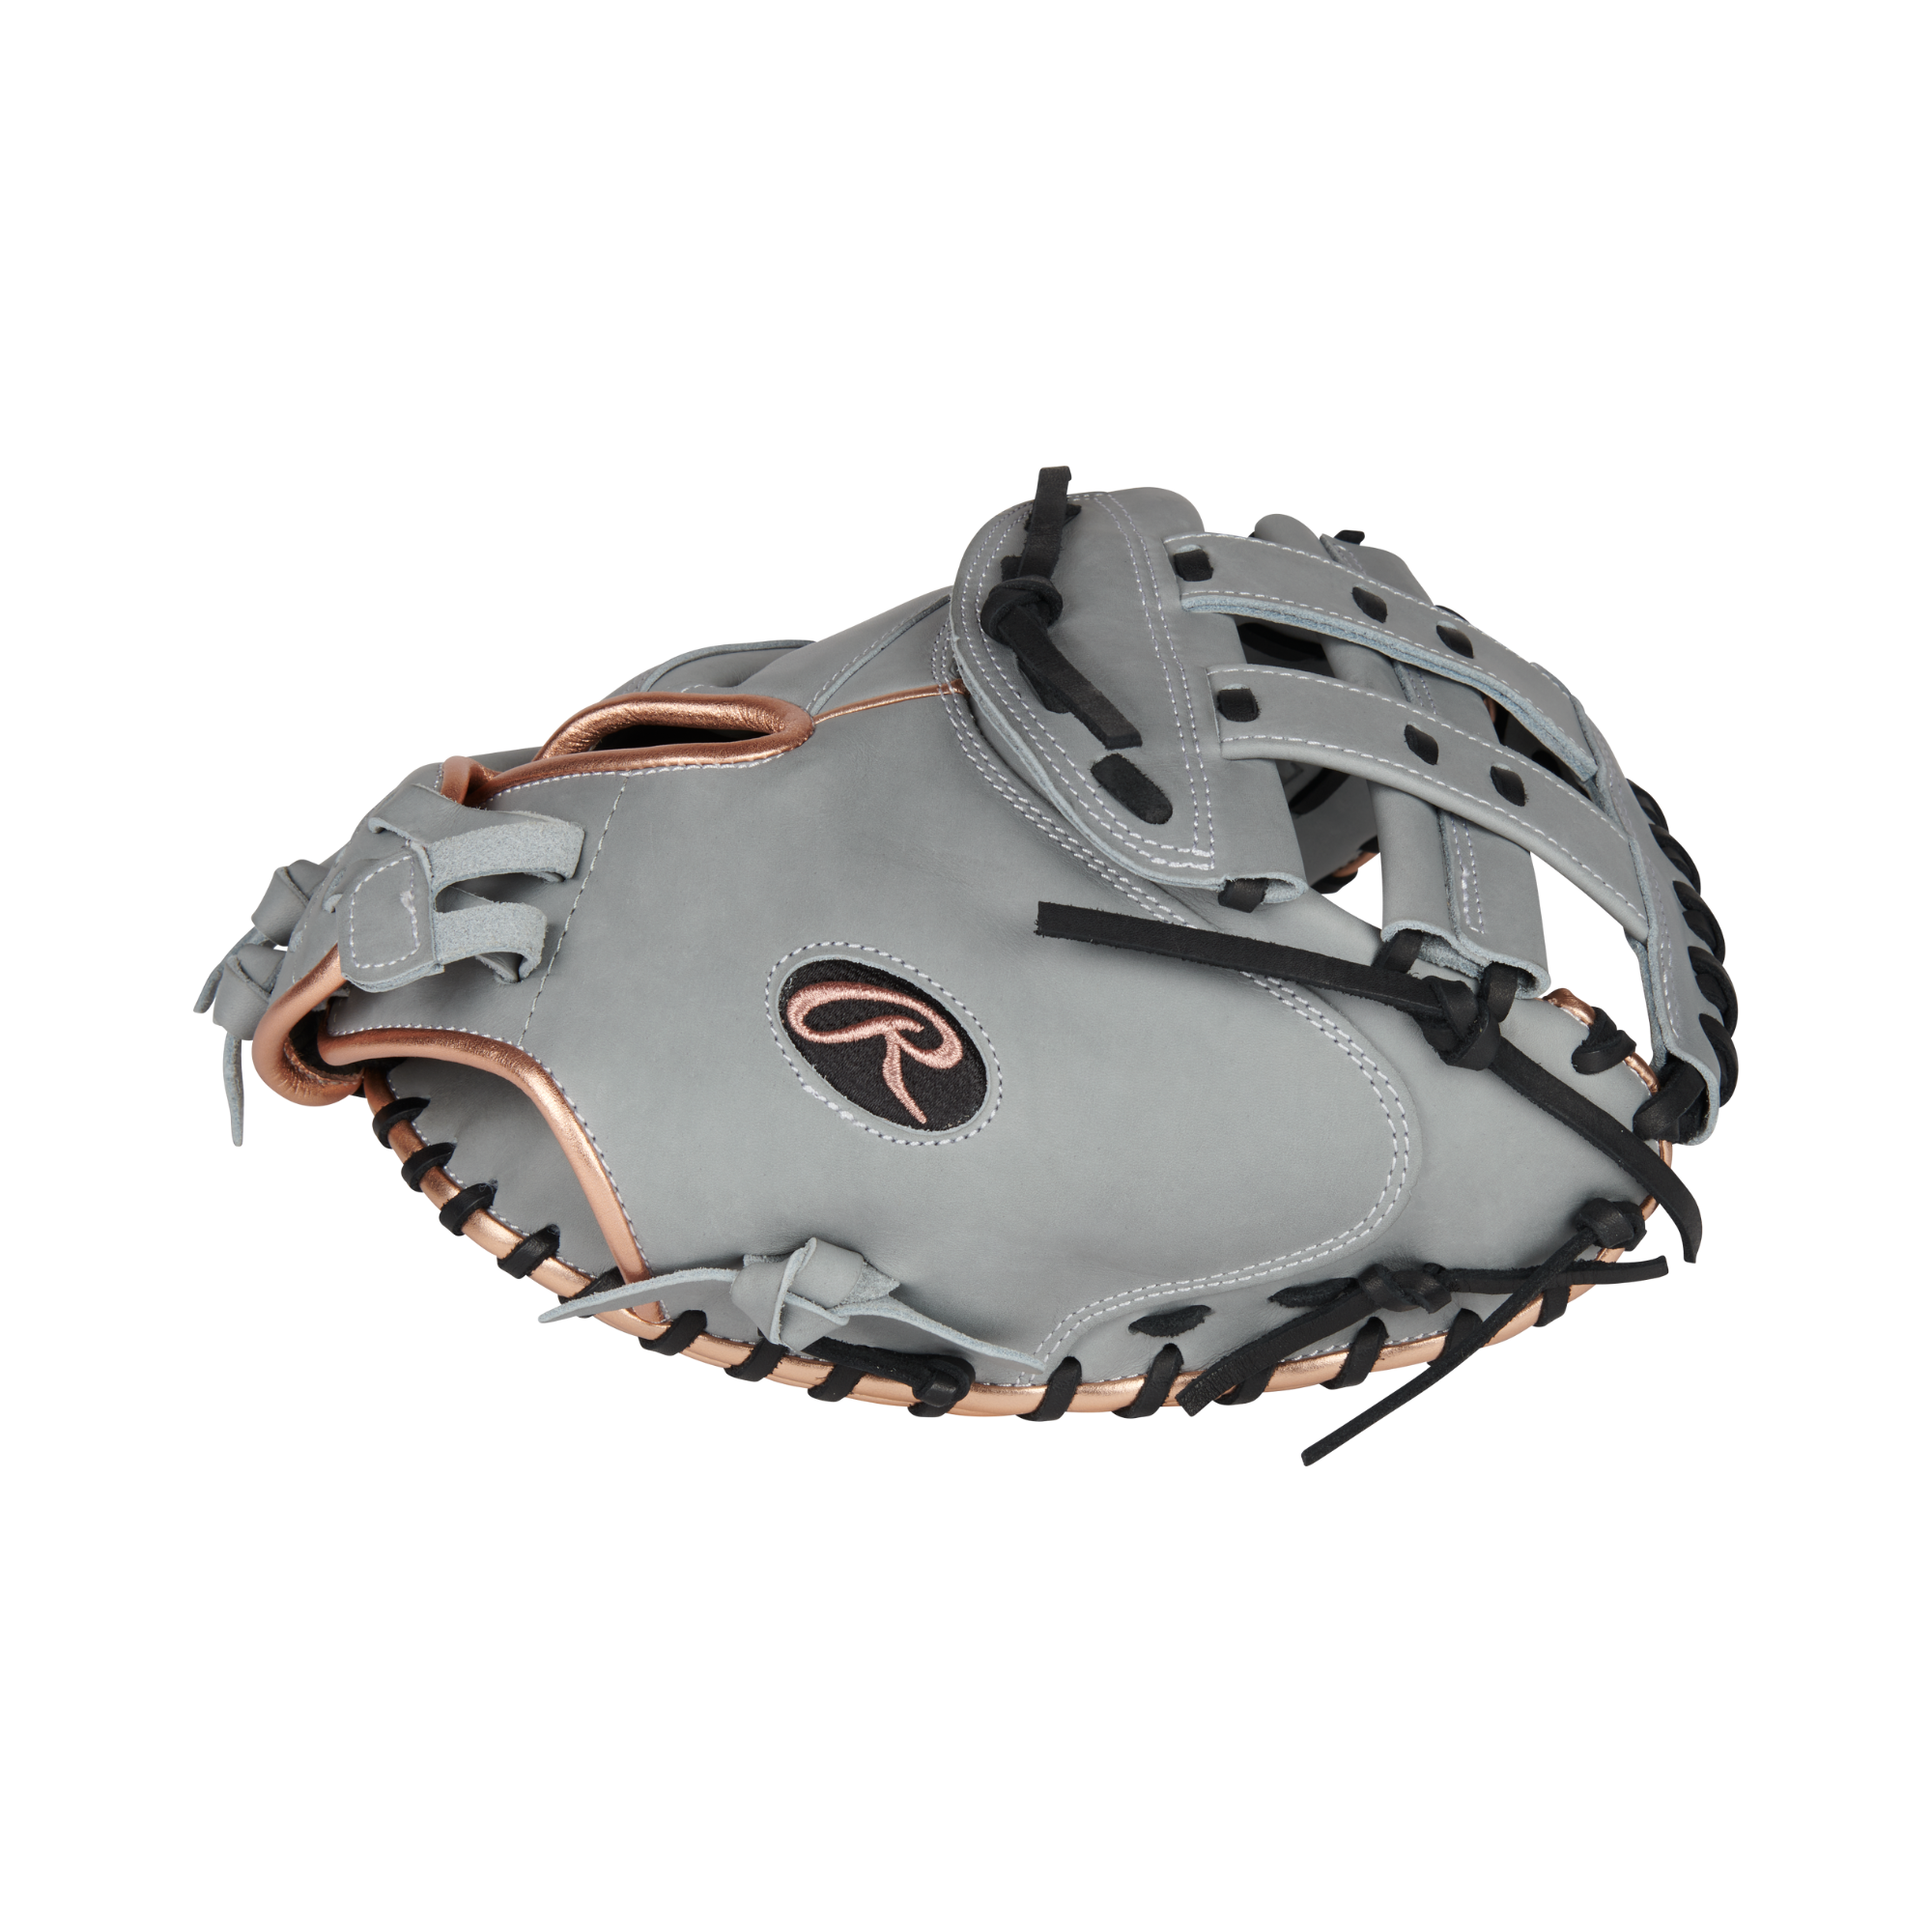 Rawlings Hearts of Hide Fastpitch Catcher's Mitt 33" RHT